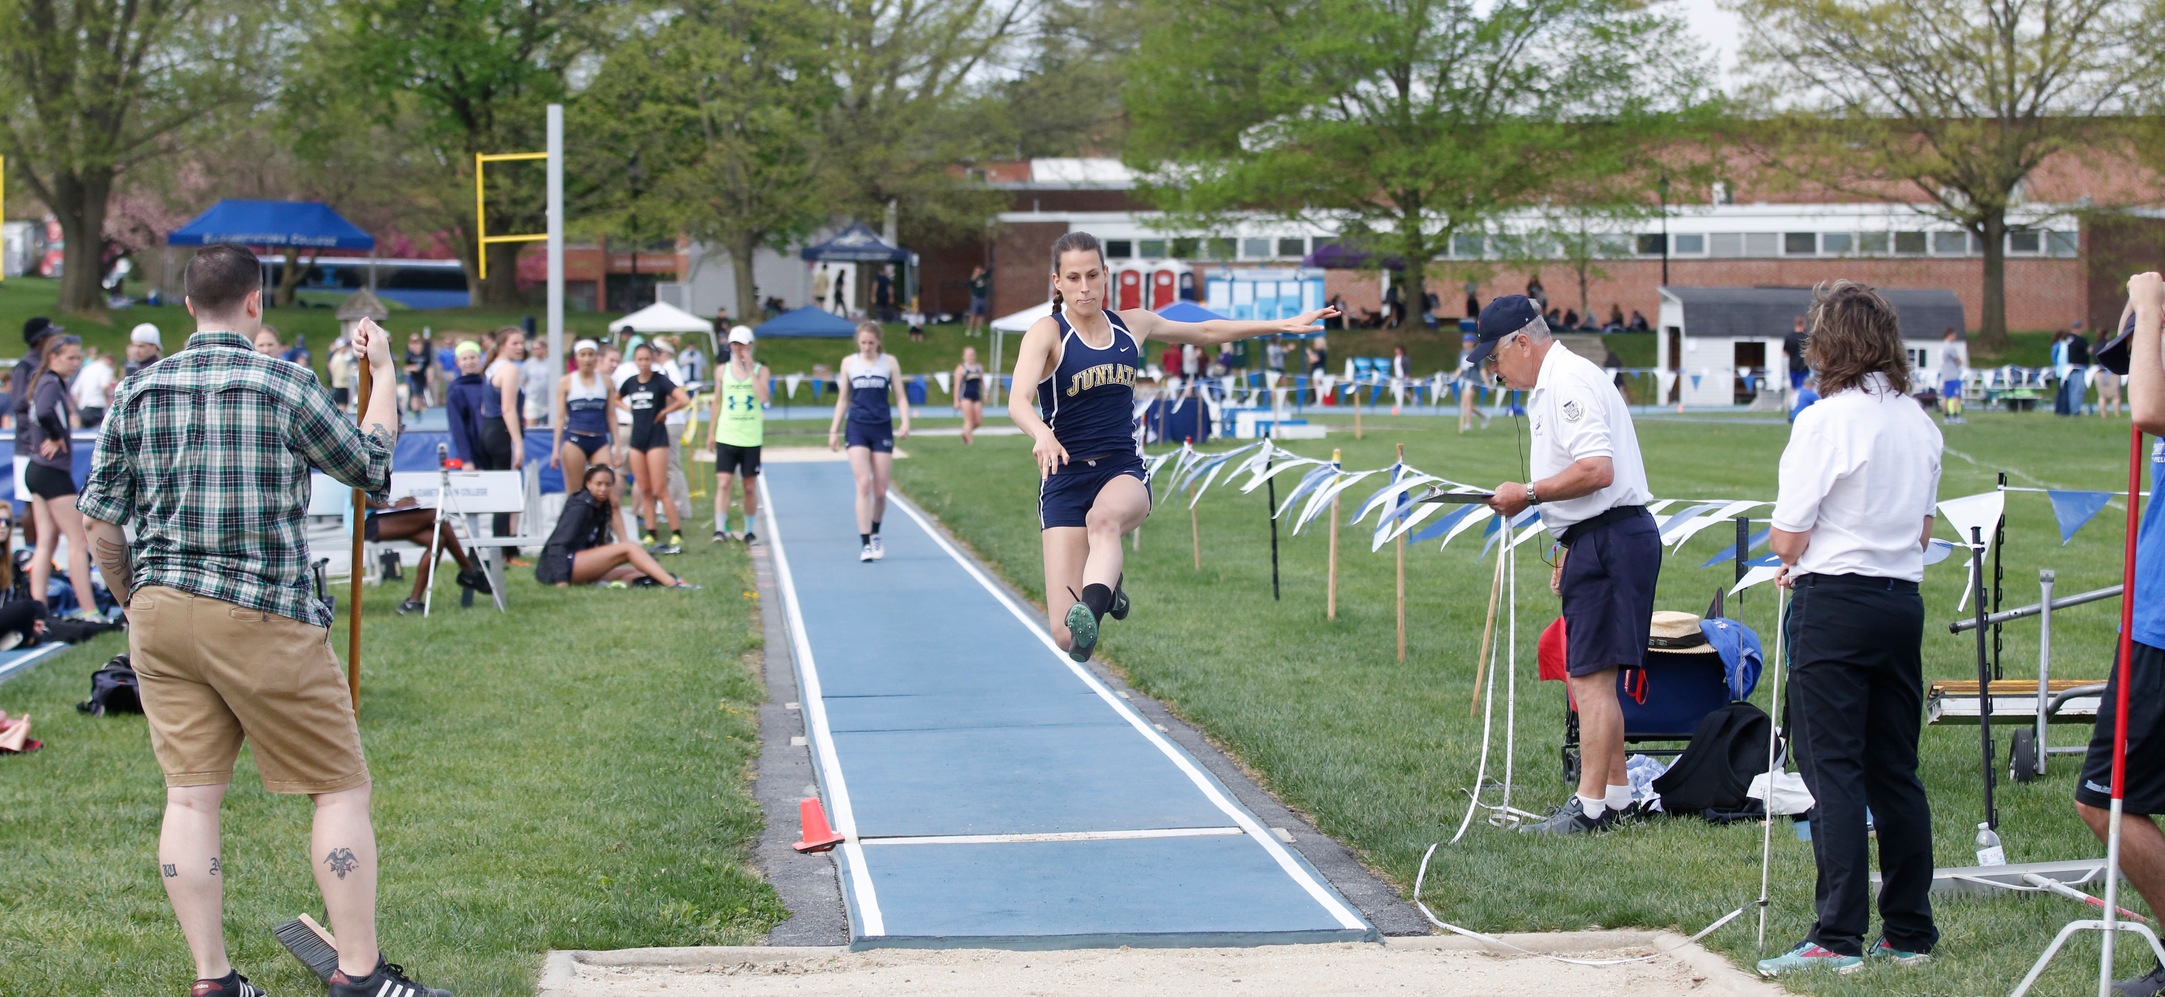 Women's Track and Field in Fourth Place After Day One of Landmark Championships